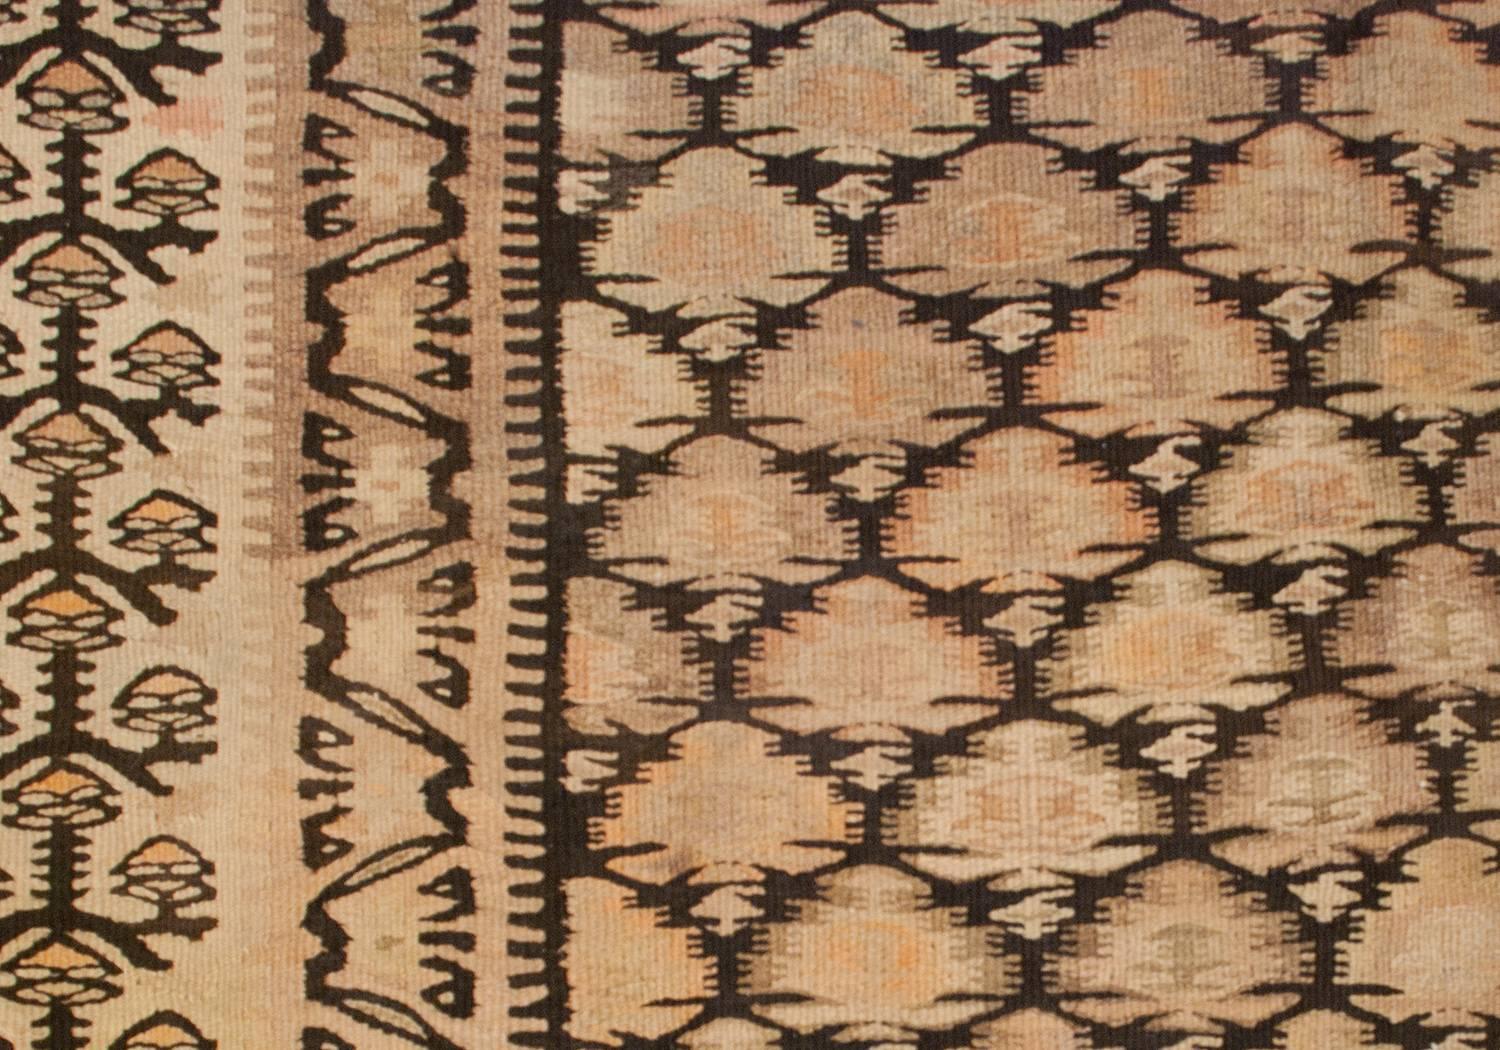 An early 20th century Persian Qazvin Kilim runner with a wonderful all-over stylized tree-of-life pattern on a black background, surrounded by a wide border with contrasting tree-of-life pattern, woven in similar naturally dyed wool.